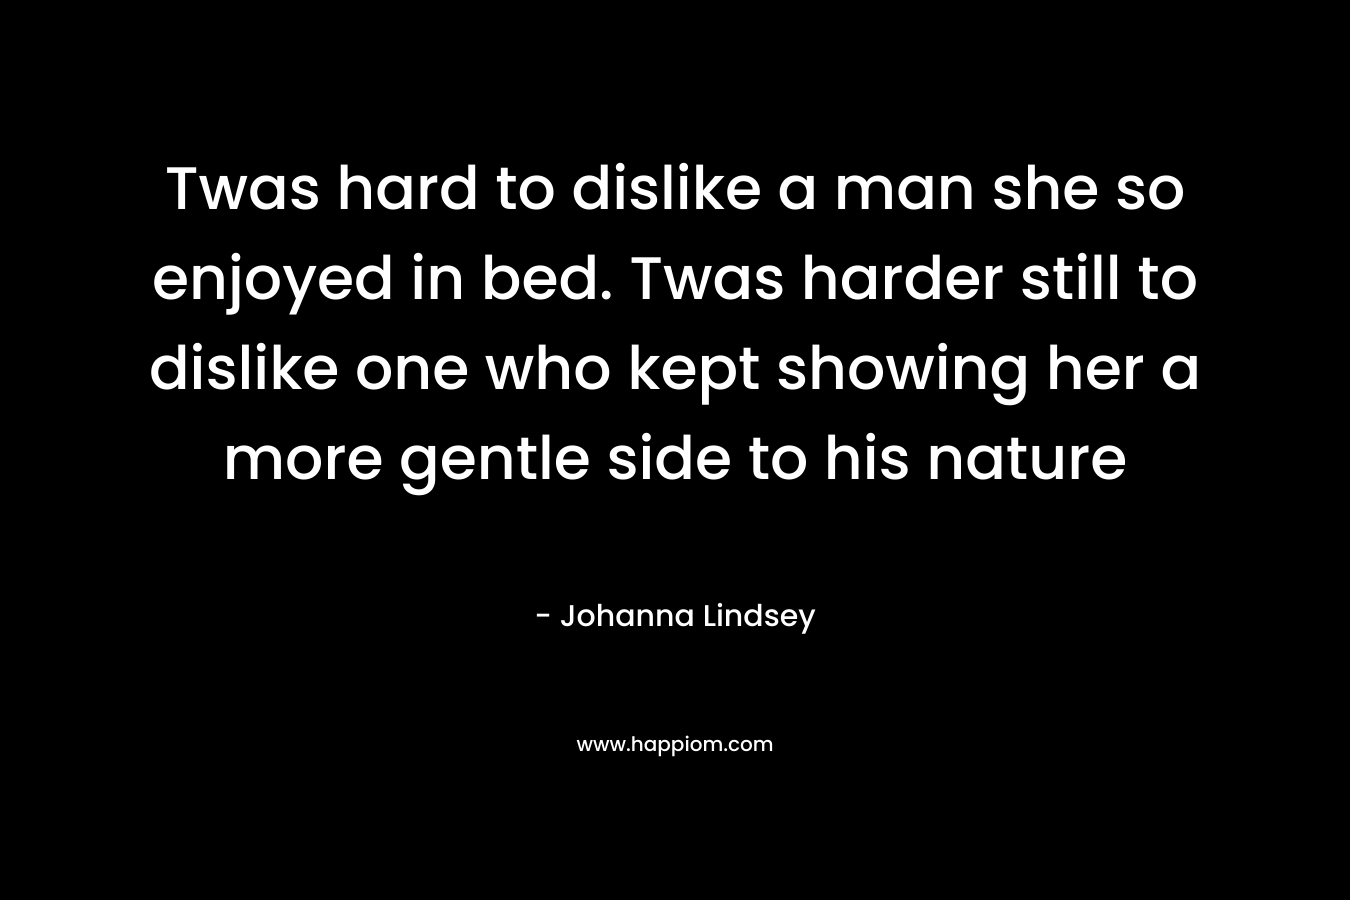 Twas hard to dislike a man she so enjoyed in bed. Twas harder still to dislike one who kept showing her a more gentle side to his nature – Johanna Lindsey